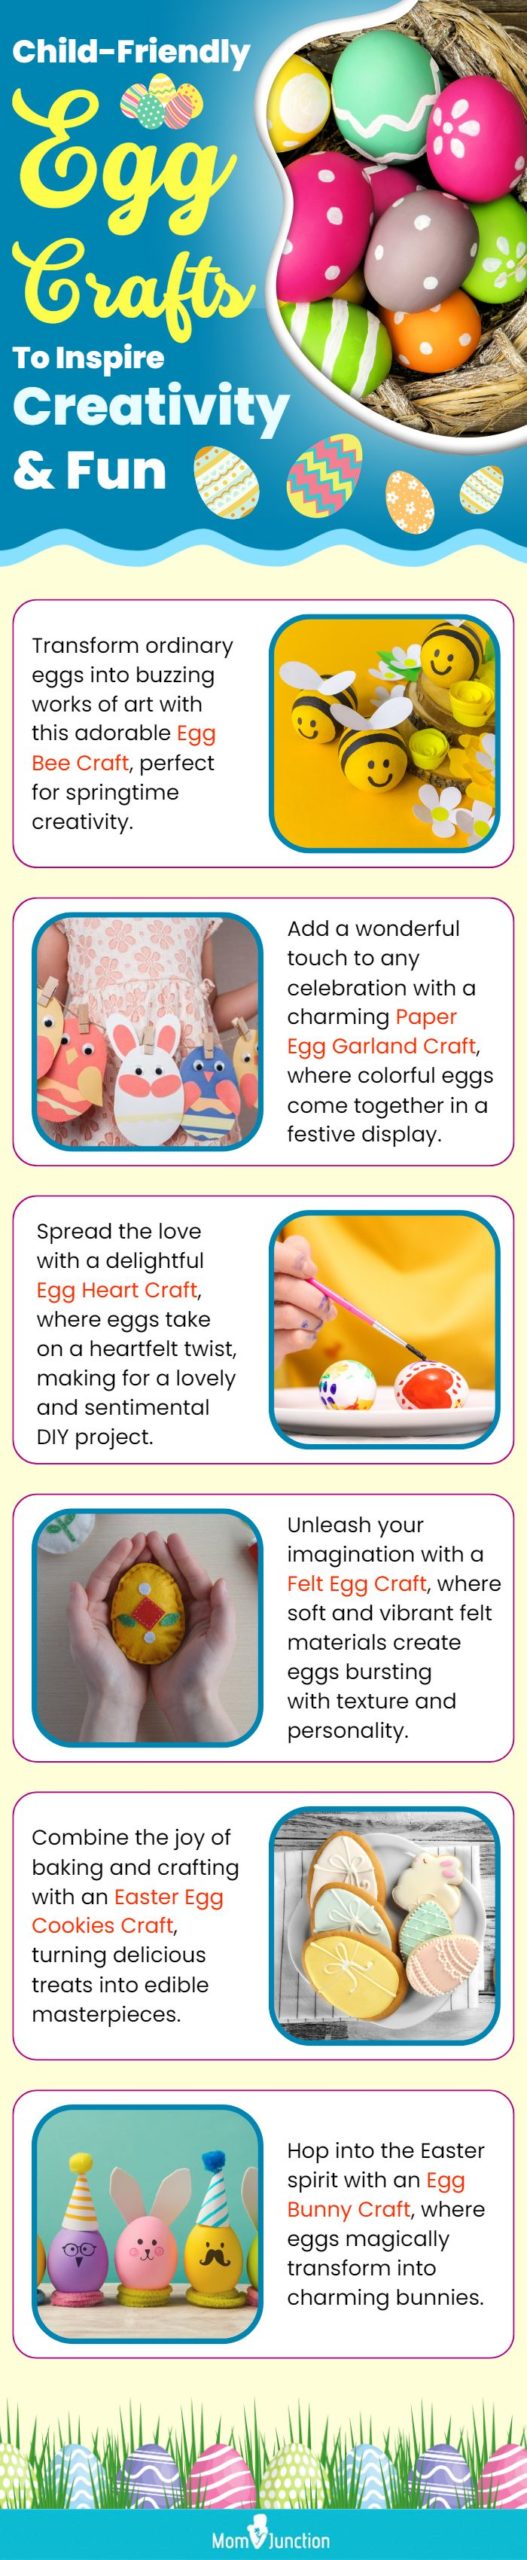 child friendly egg crafts to inspire creativity and fun (infographic)